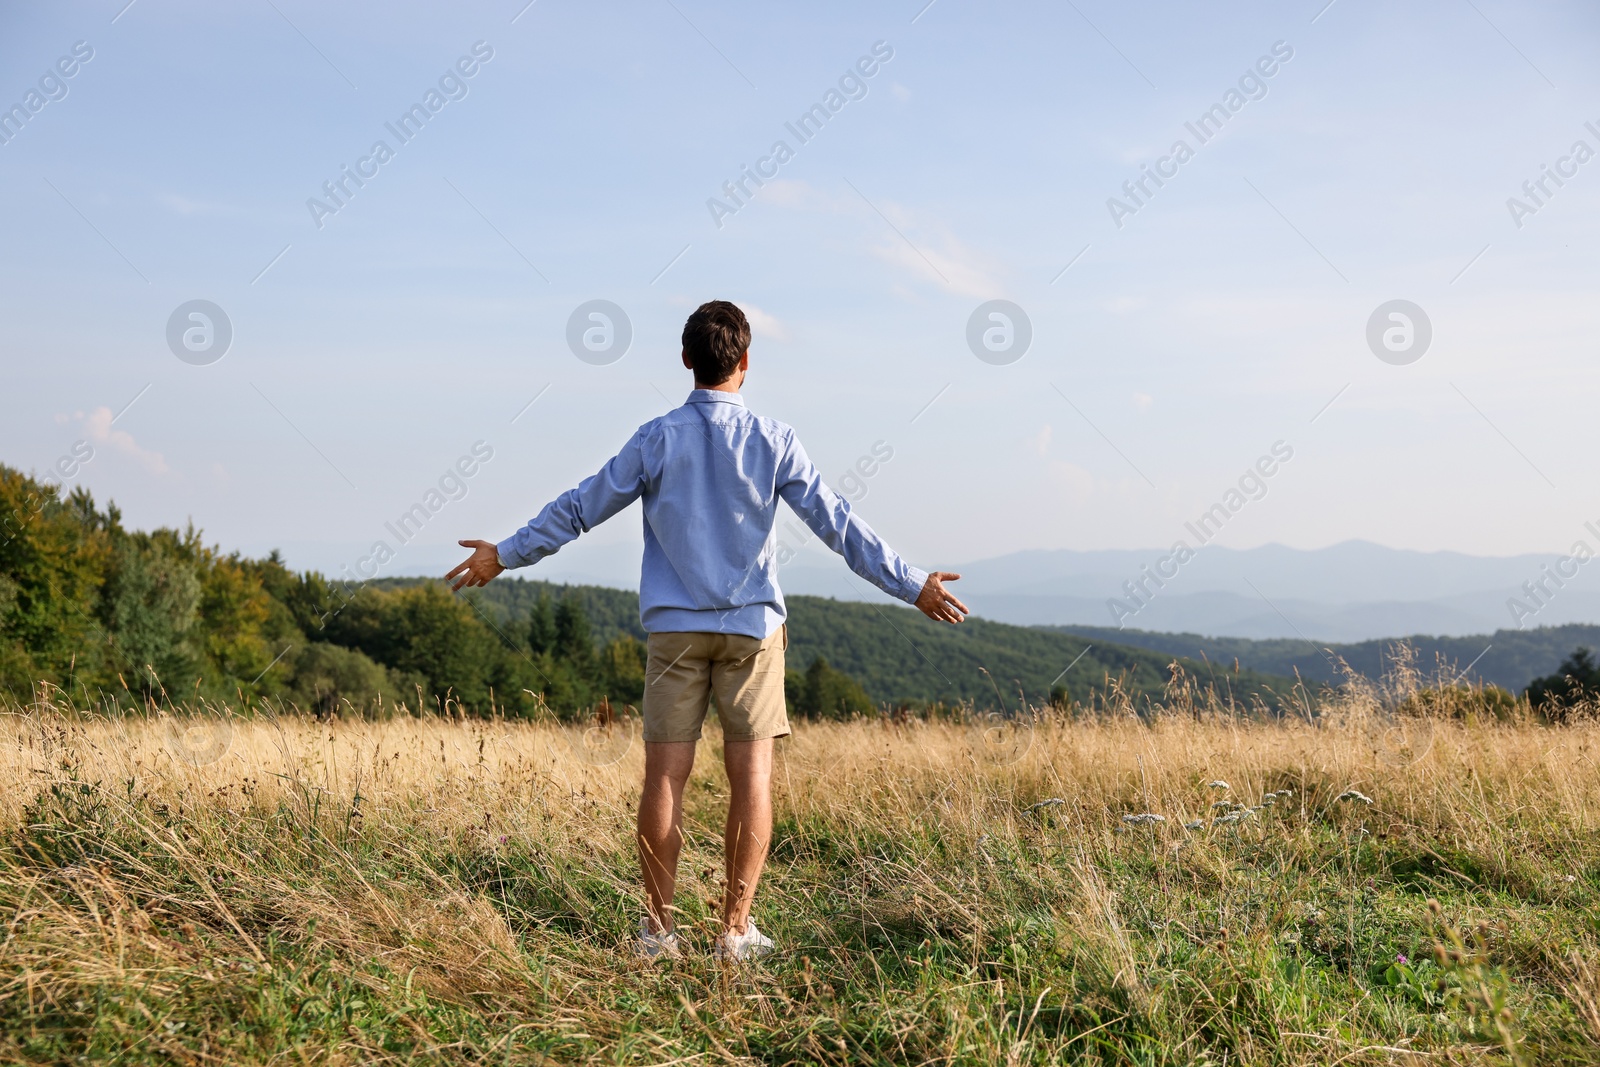 Photo of Feeling freedom. Man with wide open arms on meadow, back view